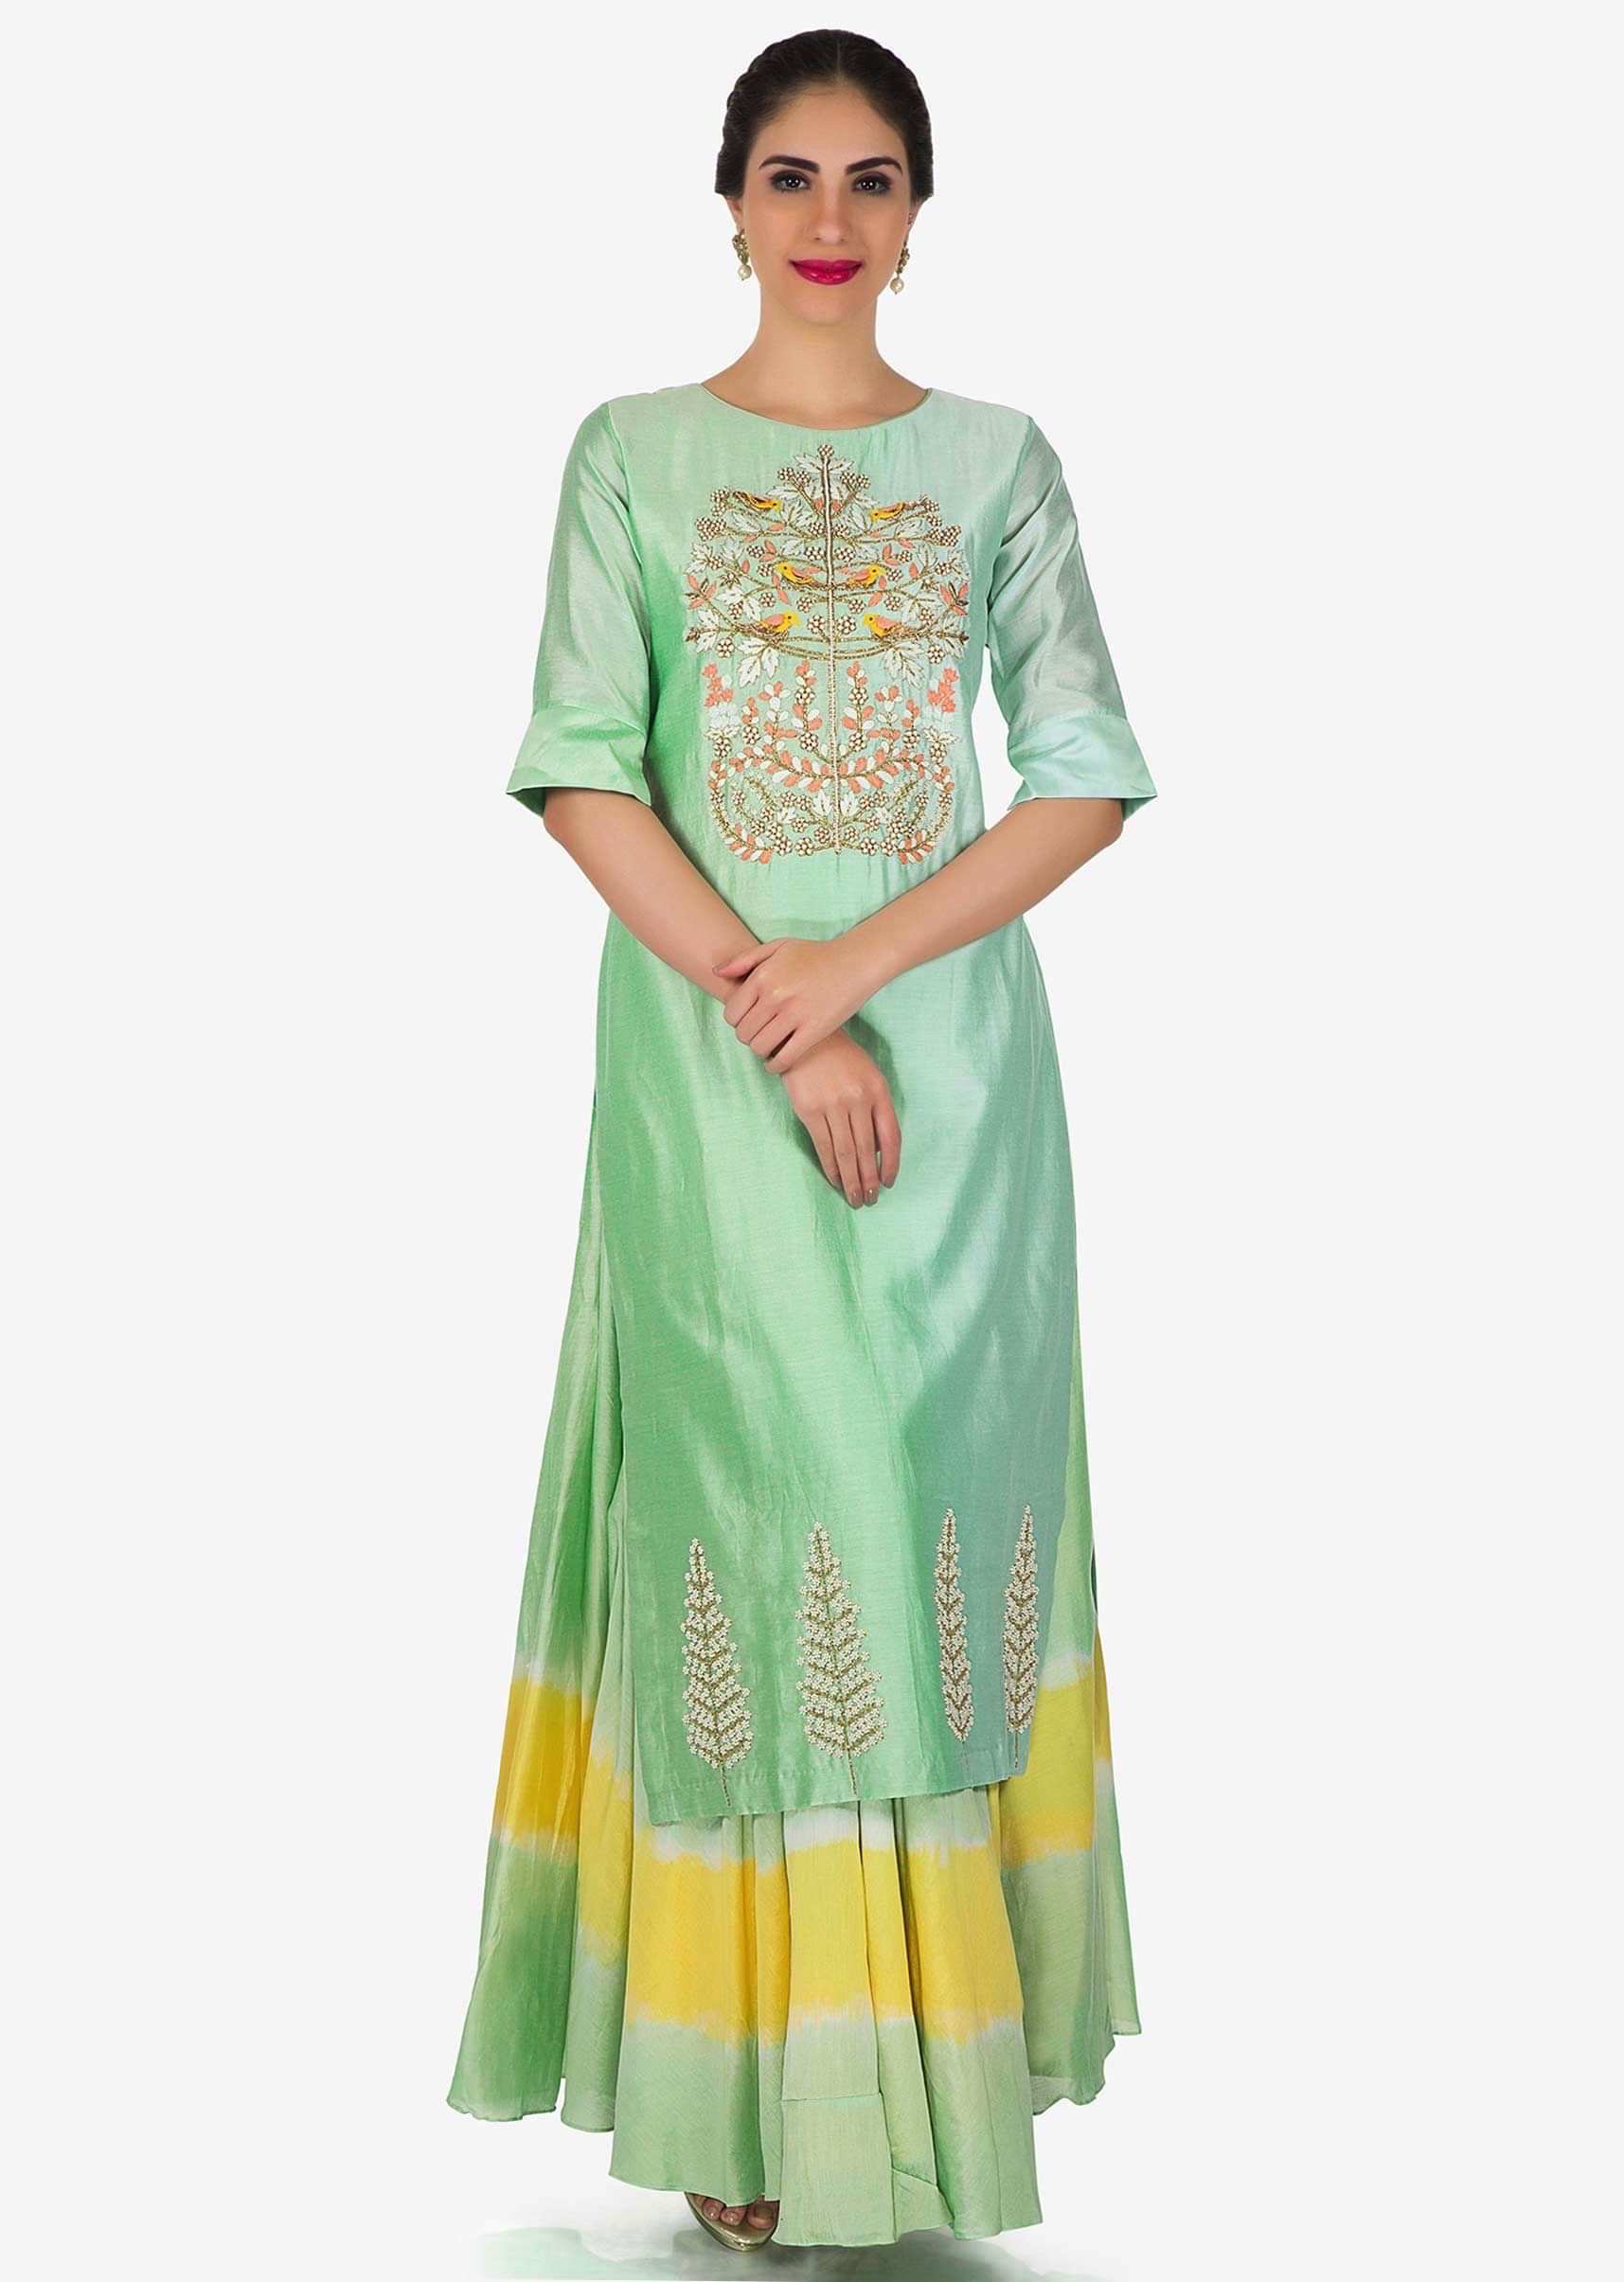 Apple Green Shaded Straight Suit In Art Silk With Moti And Zardosi Embroidery Online - Kalki Fashion